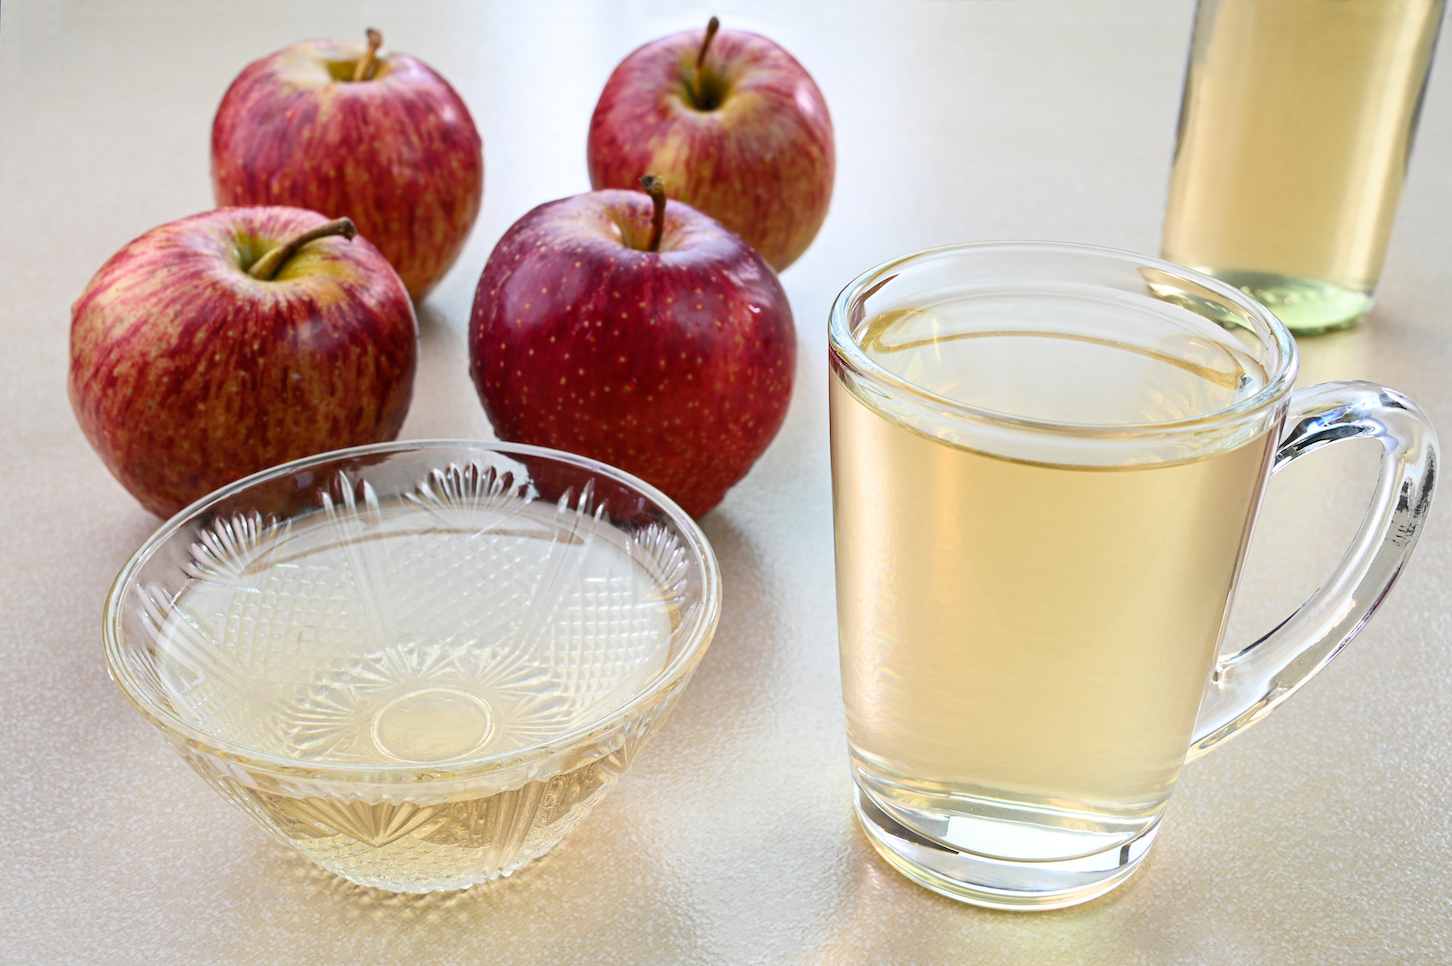 Apple cider vinegar in a glass cup and bowl apples in the background.